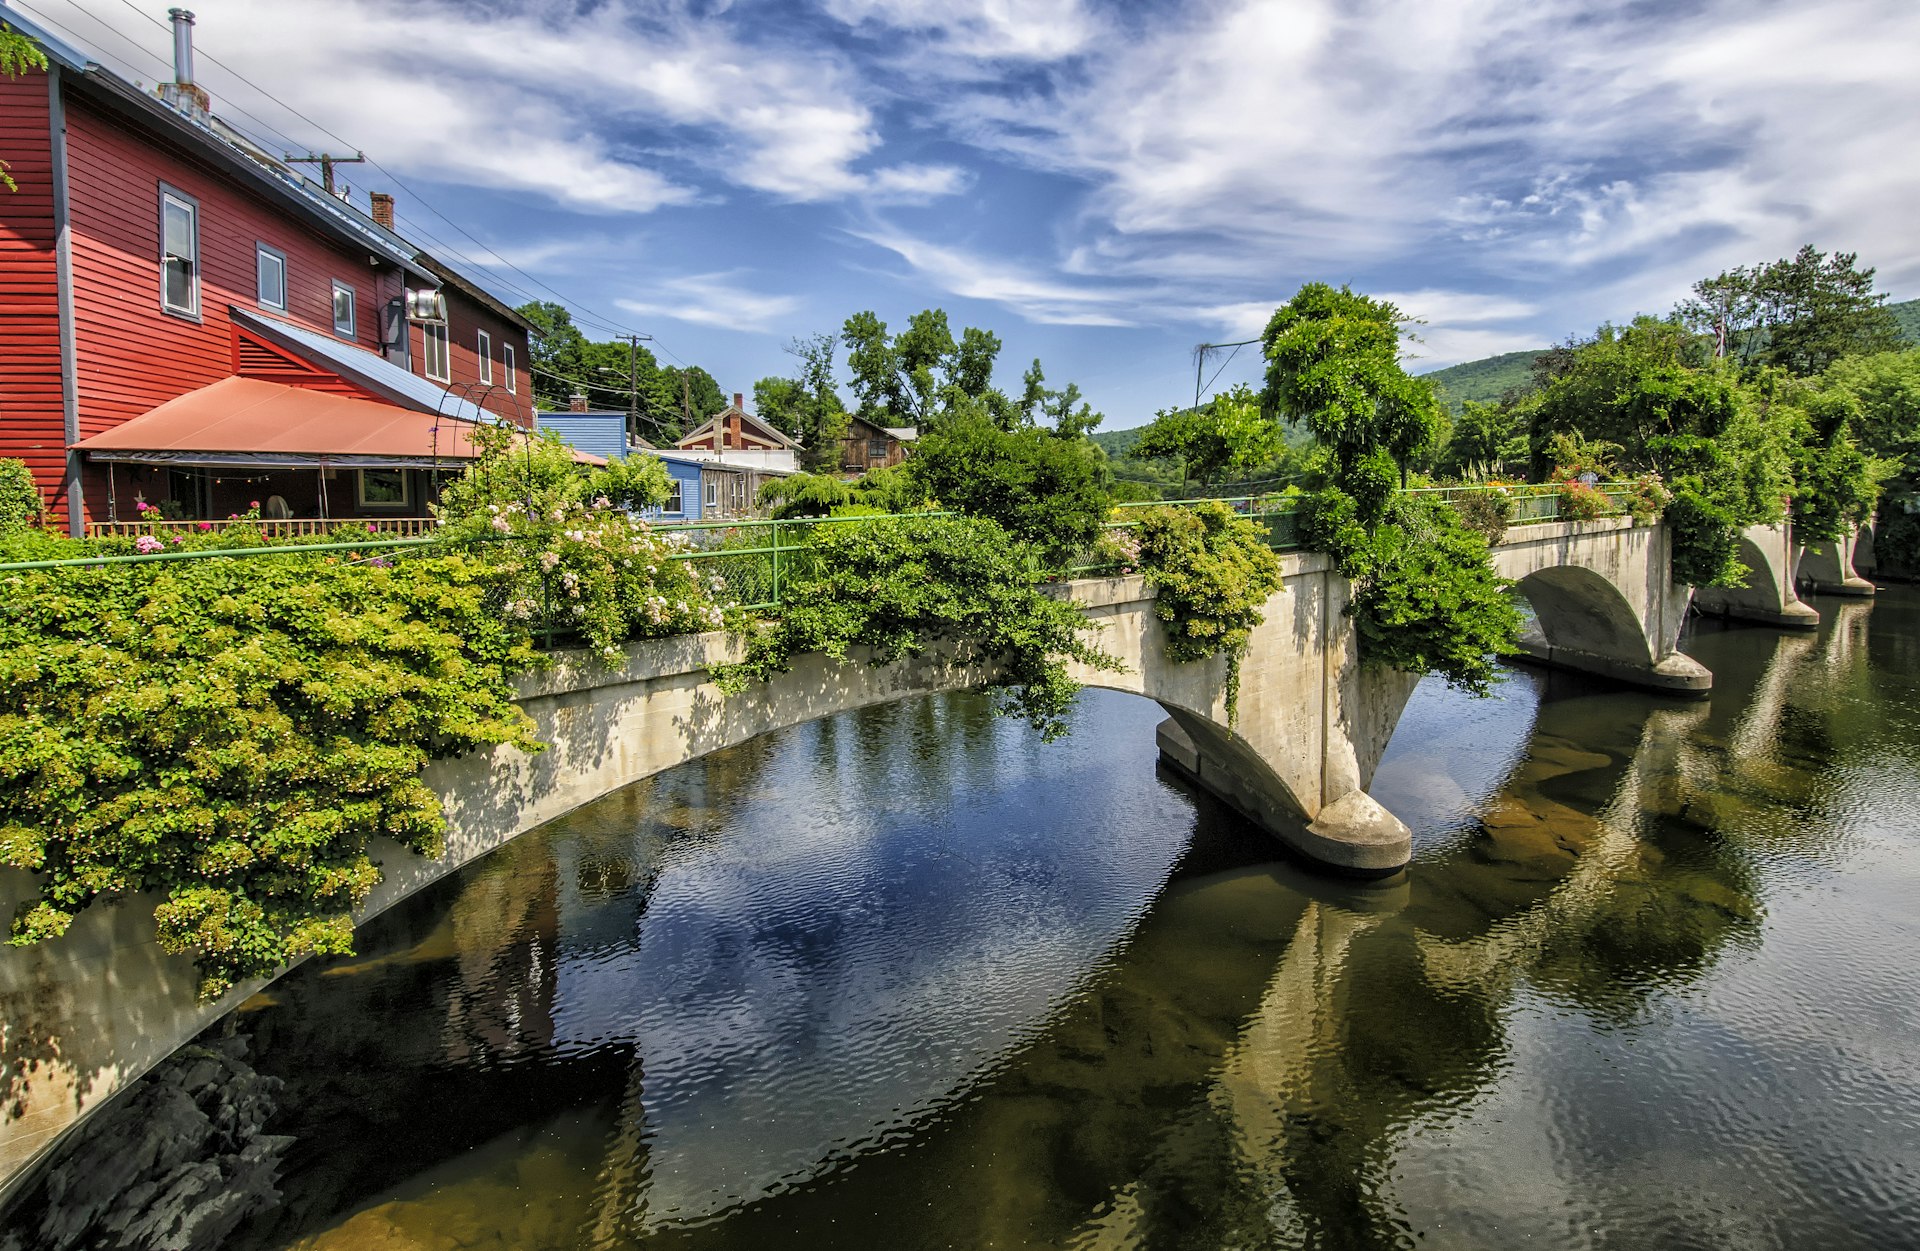 The greenery-covered Bridge of Flowers, spanning the Deerfield River in the western Massachusetts town of Shelburne Falls